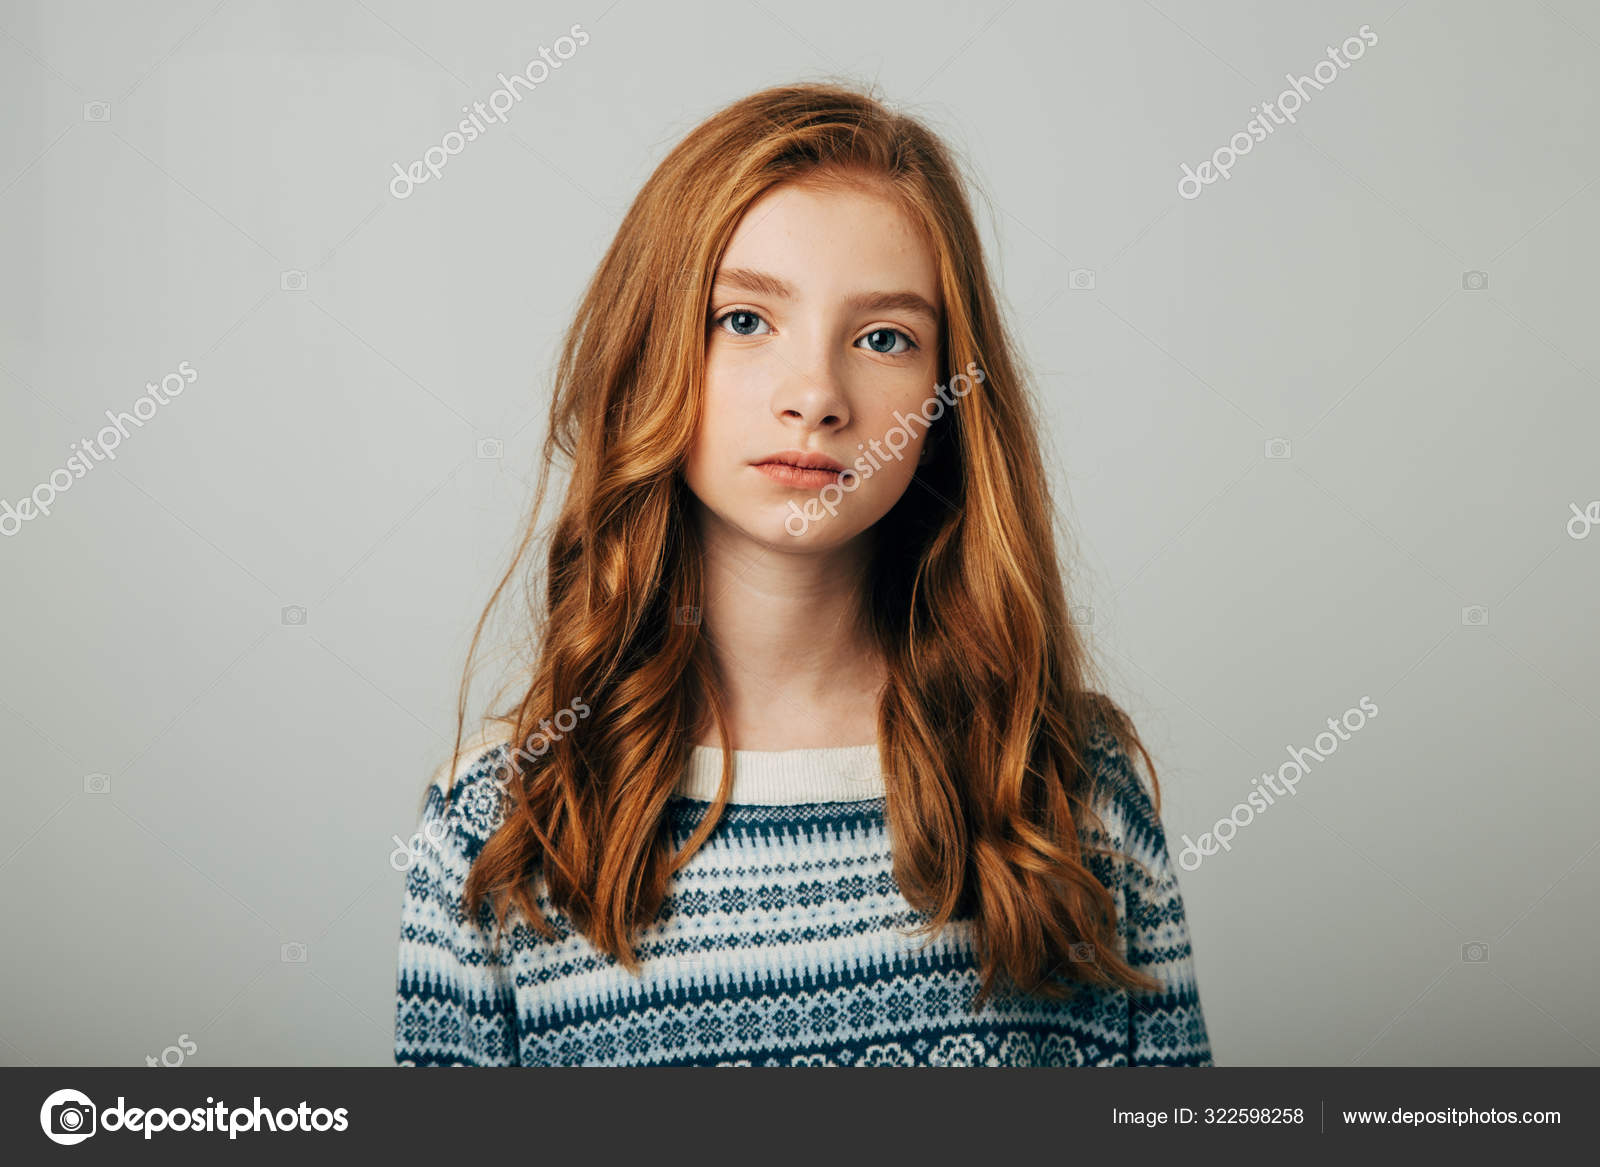 A young red-haired girl in a blue sweater looks at the camera. A girl with